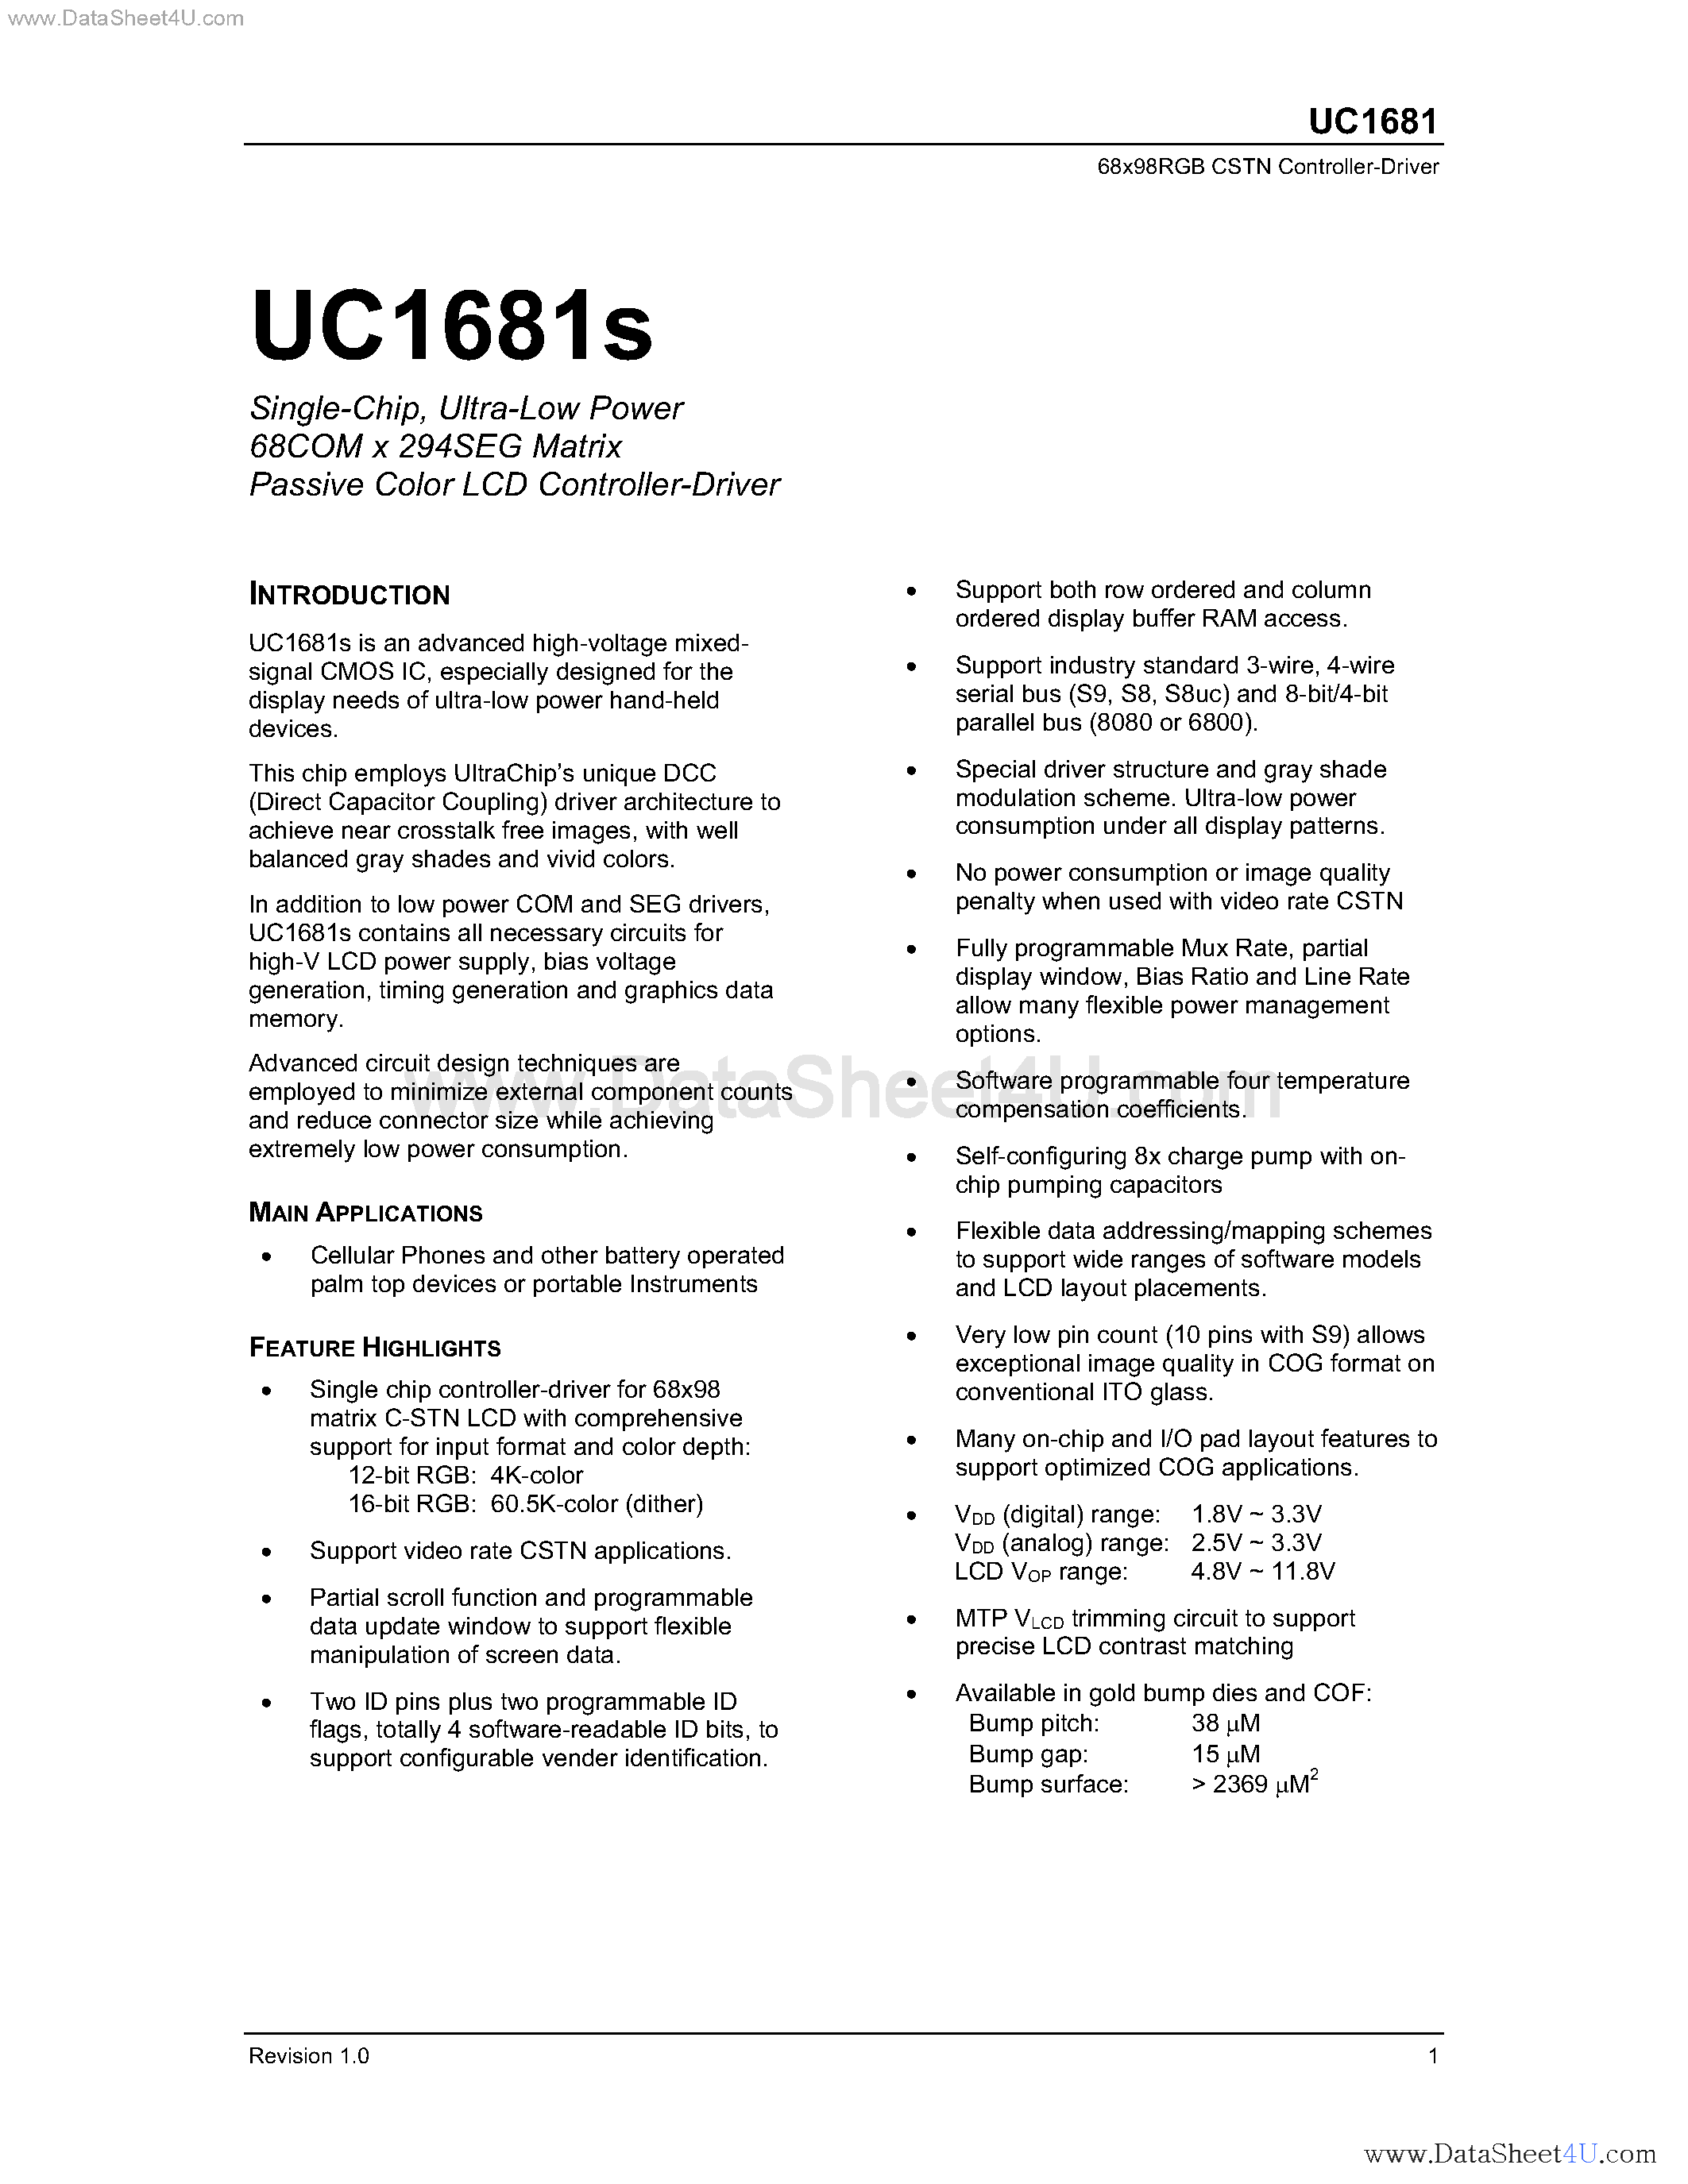 Datasheet UC1681S - Single Chip Ultra Low Power Passive Color LCD Controller Driver page 1